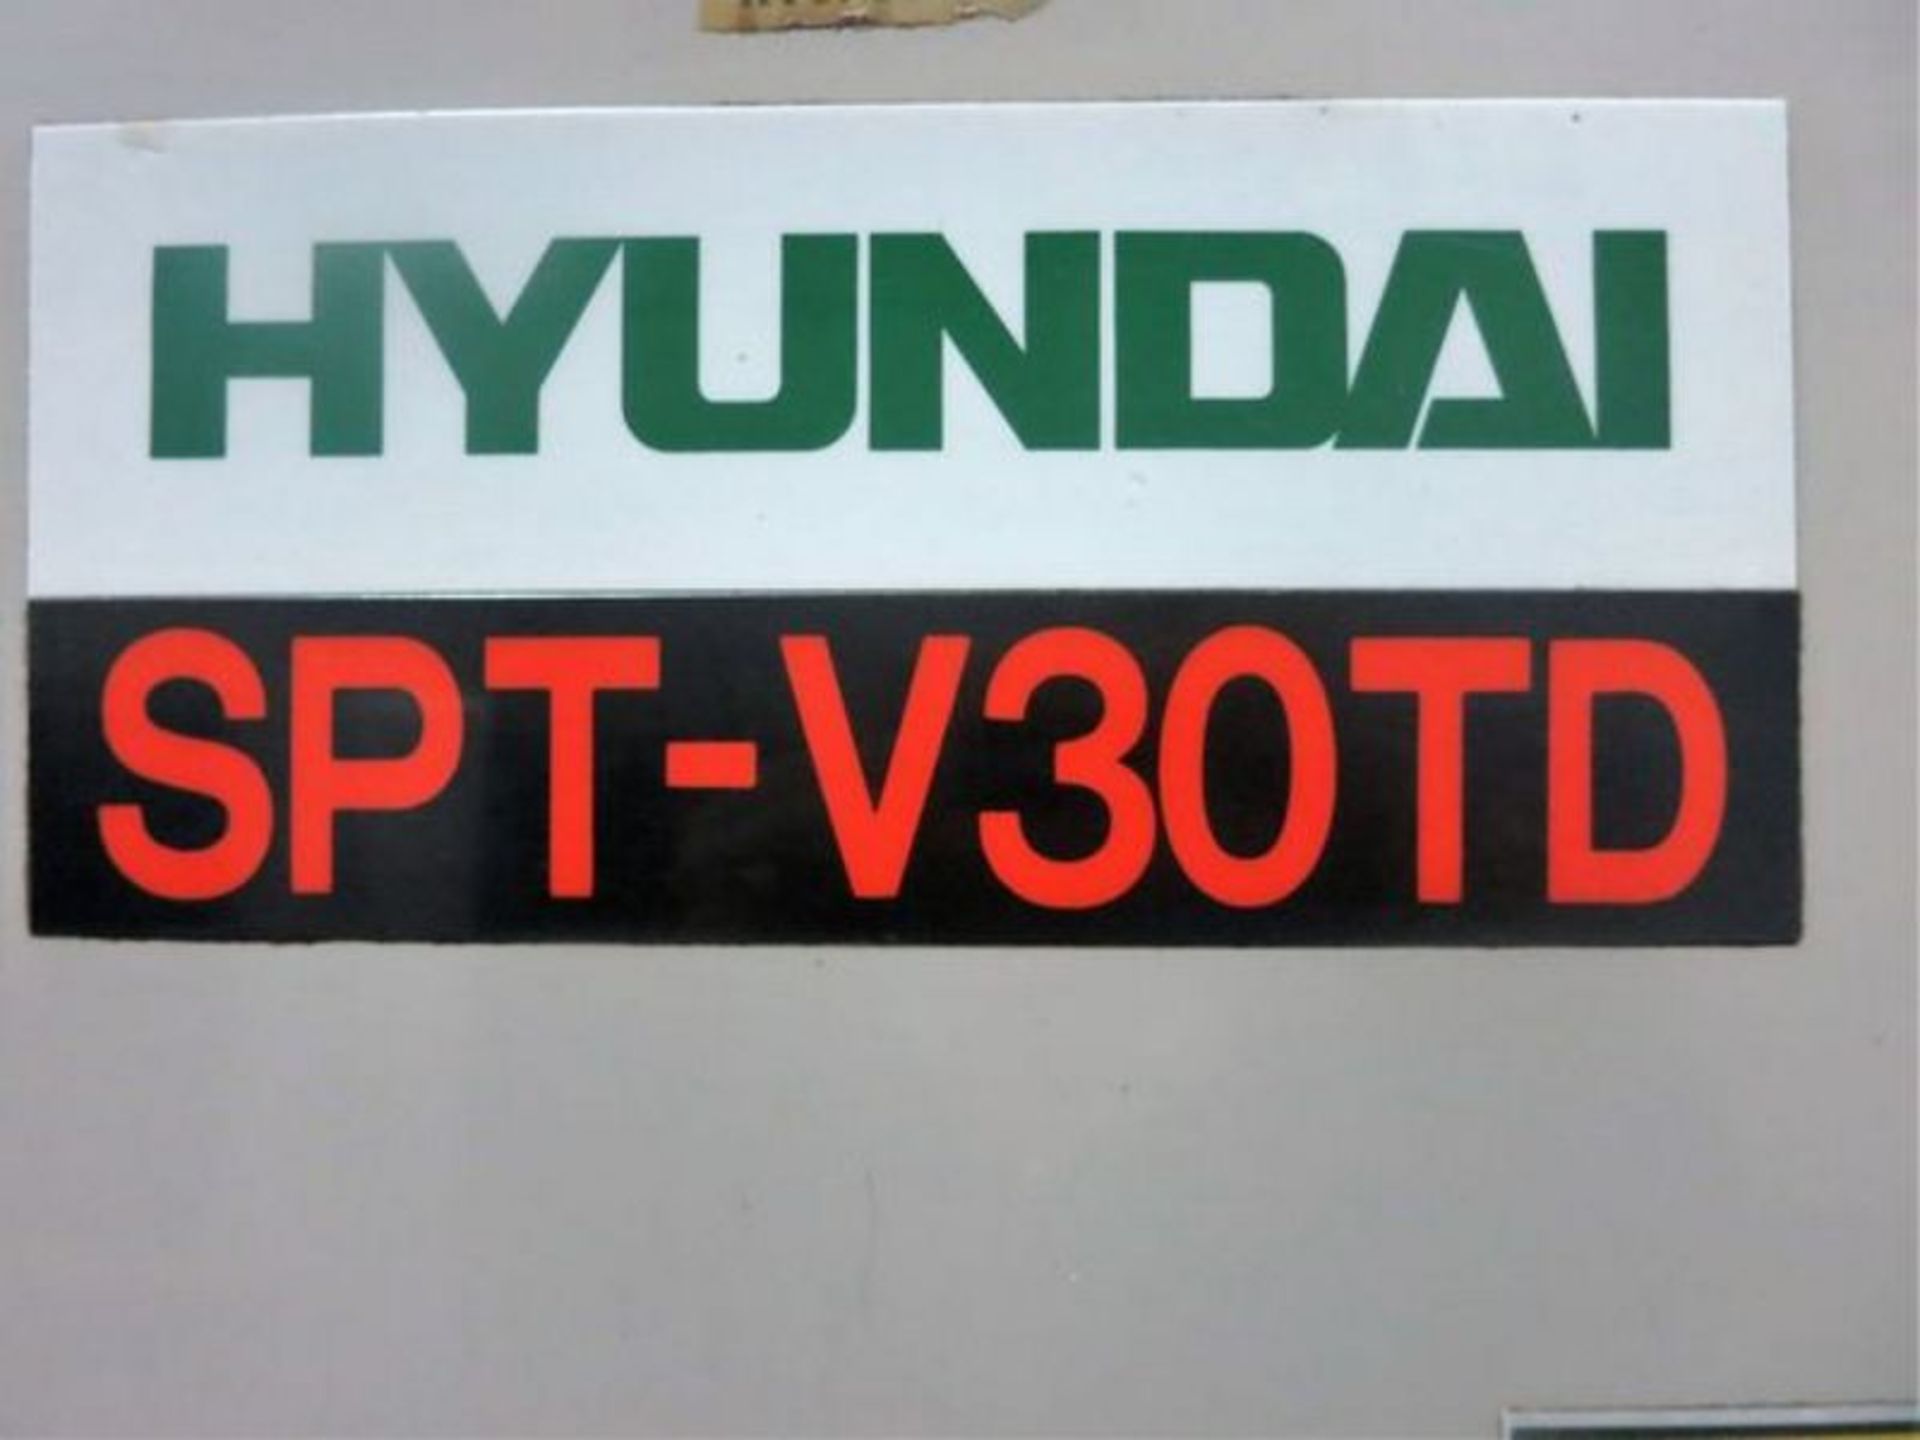 Hyundai SPTV30TD CNC Tapmill Center with Pallet Changer, S/N 73H8056, New 1999 General - Image 10 of 10